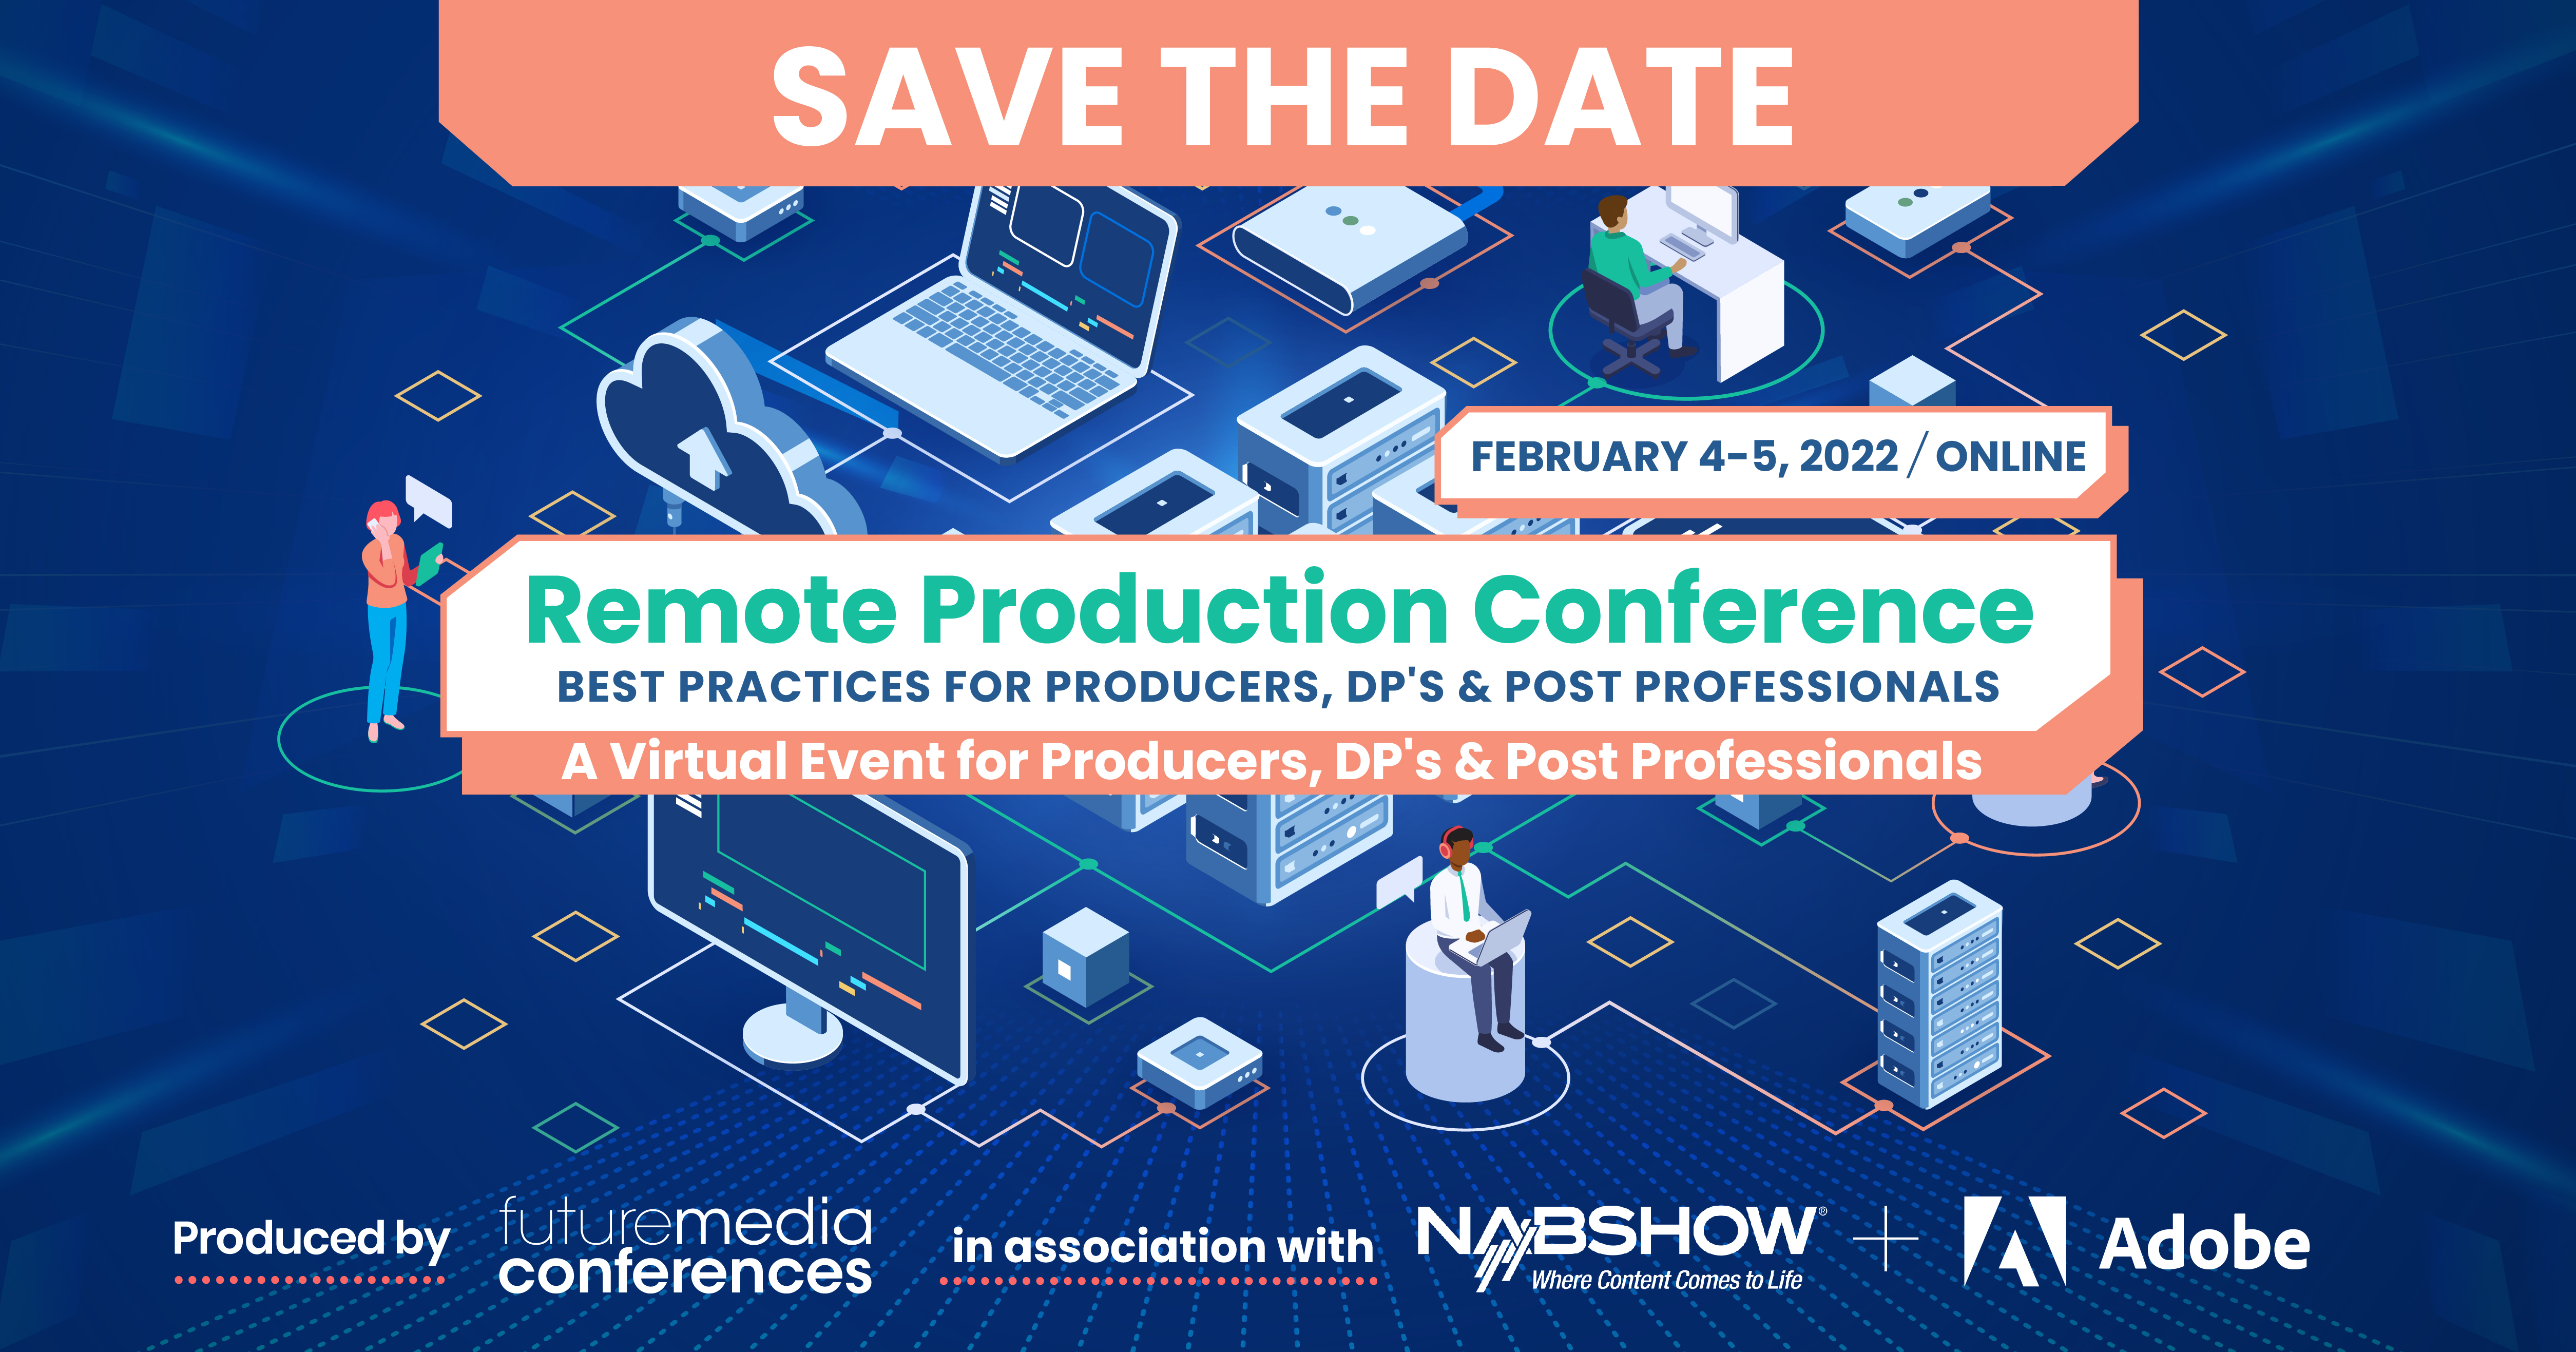 Remote Production Conference runs February 4 - 5, 2022 4